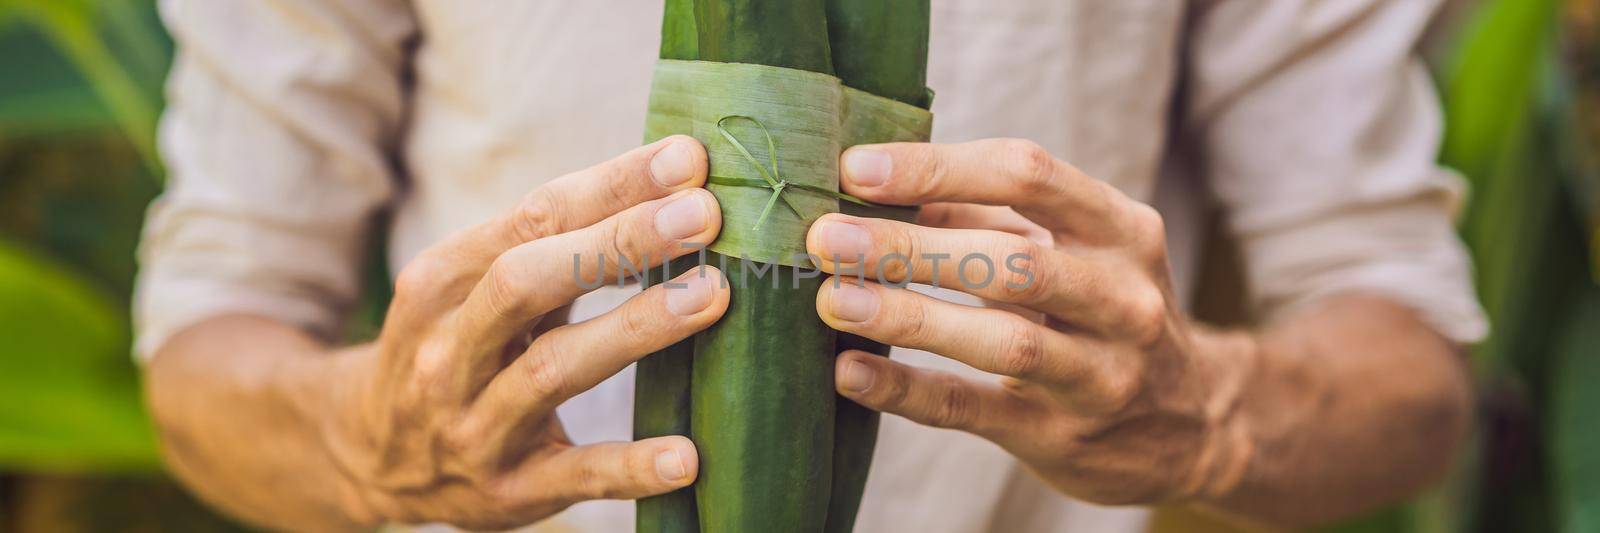 BANNER, LONG FORMAT Eco-friendly product packaging concept. Cucumber wrapped in a banana leaf, as an alternative to a plastic bag. Zero waste concept. Alternative packaging.